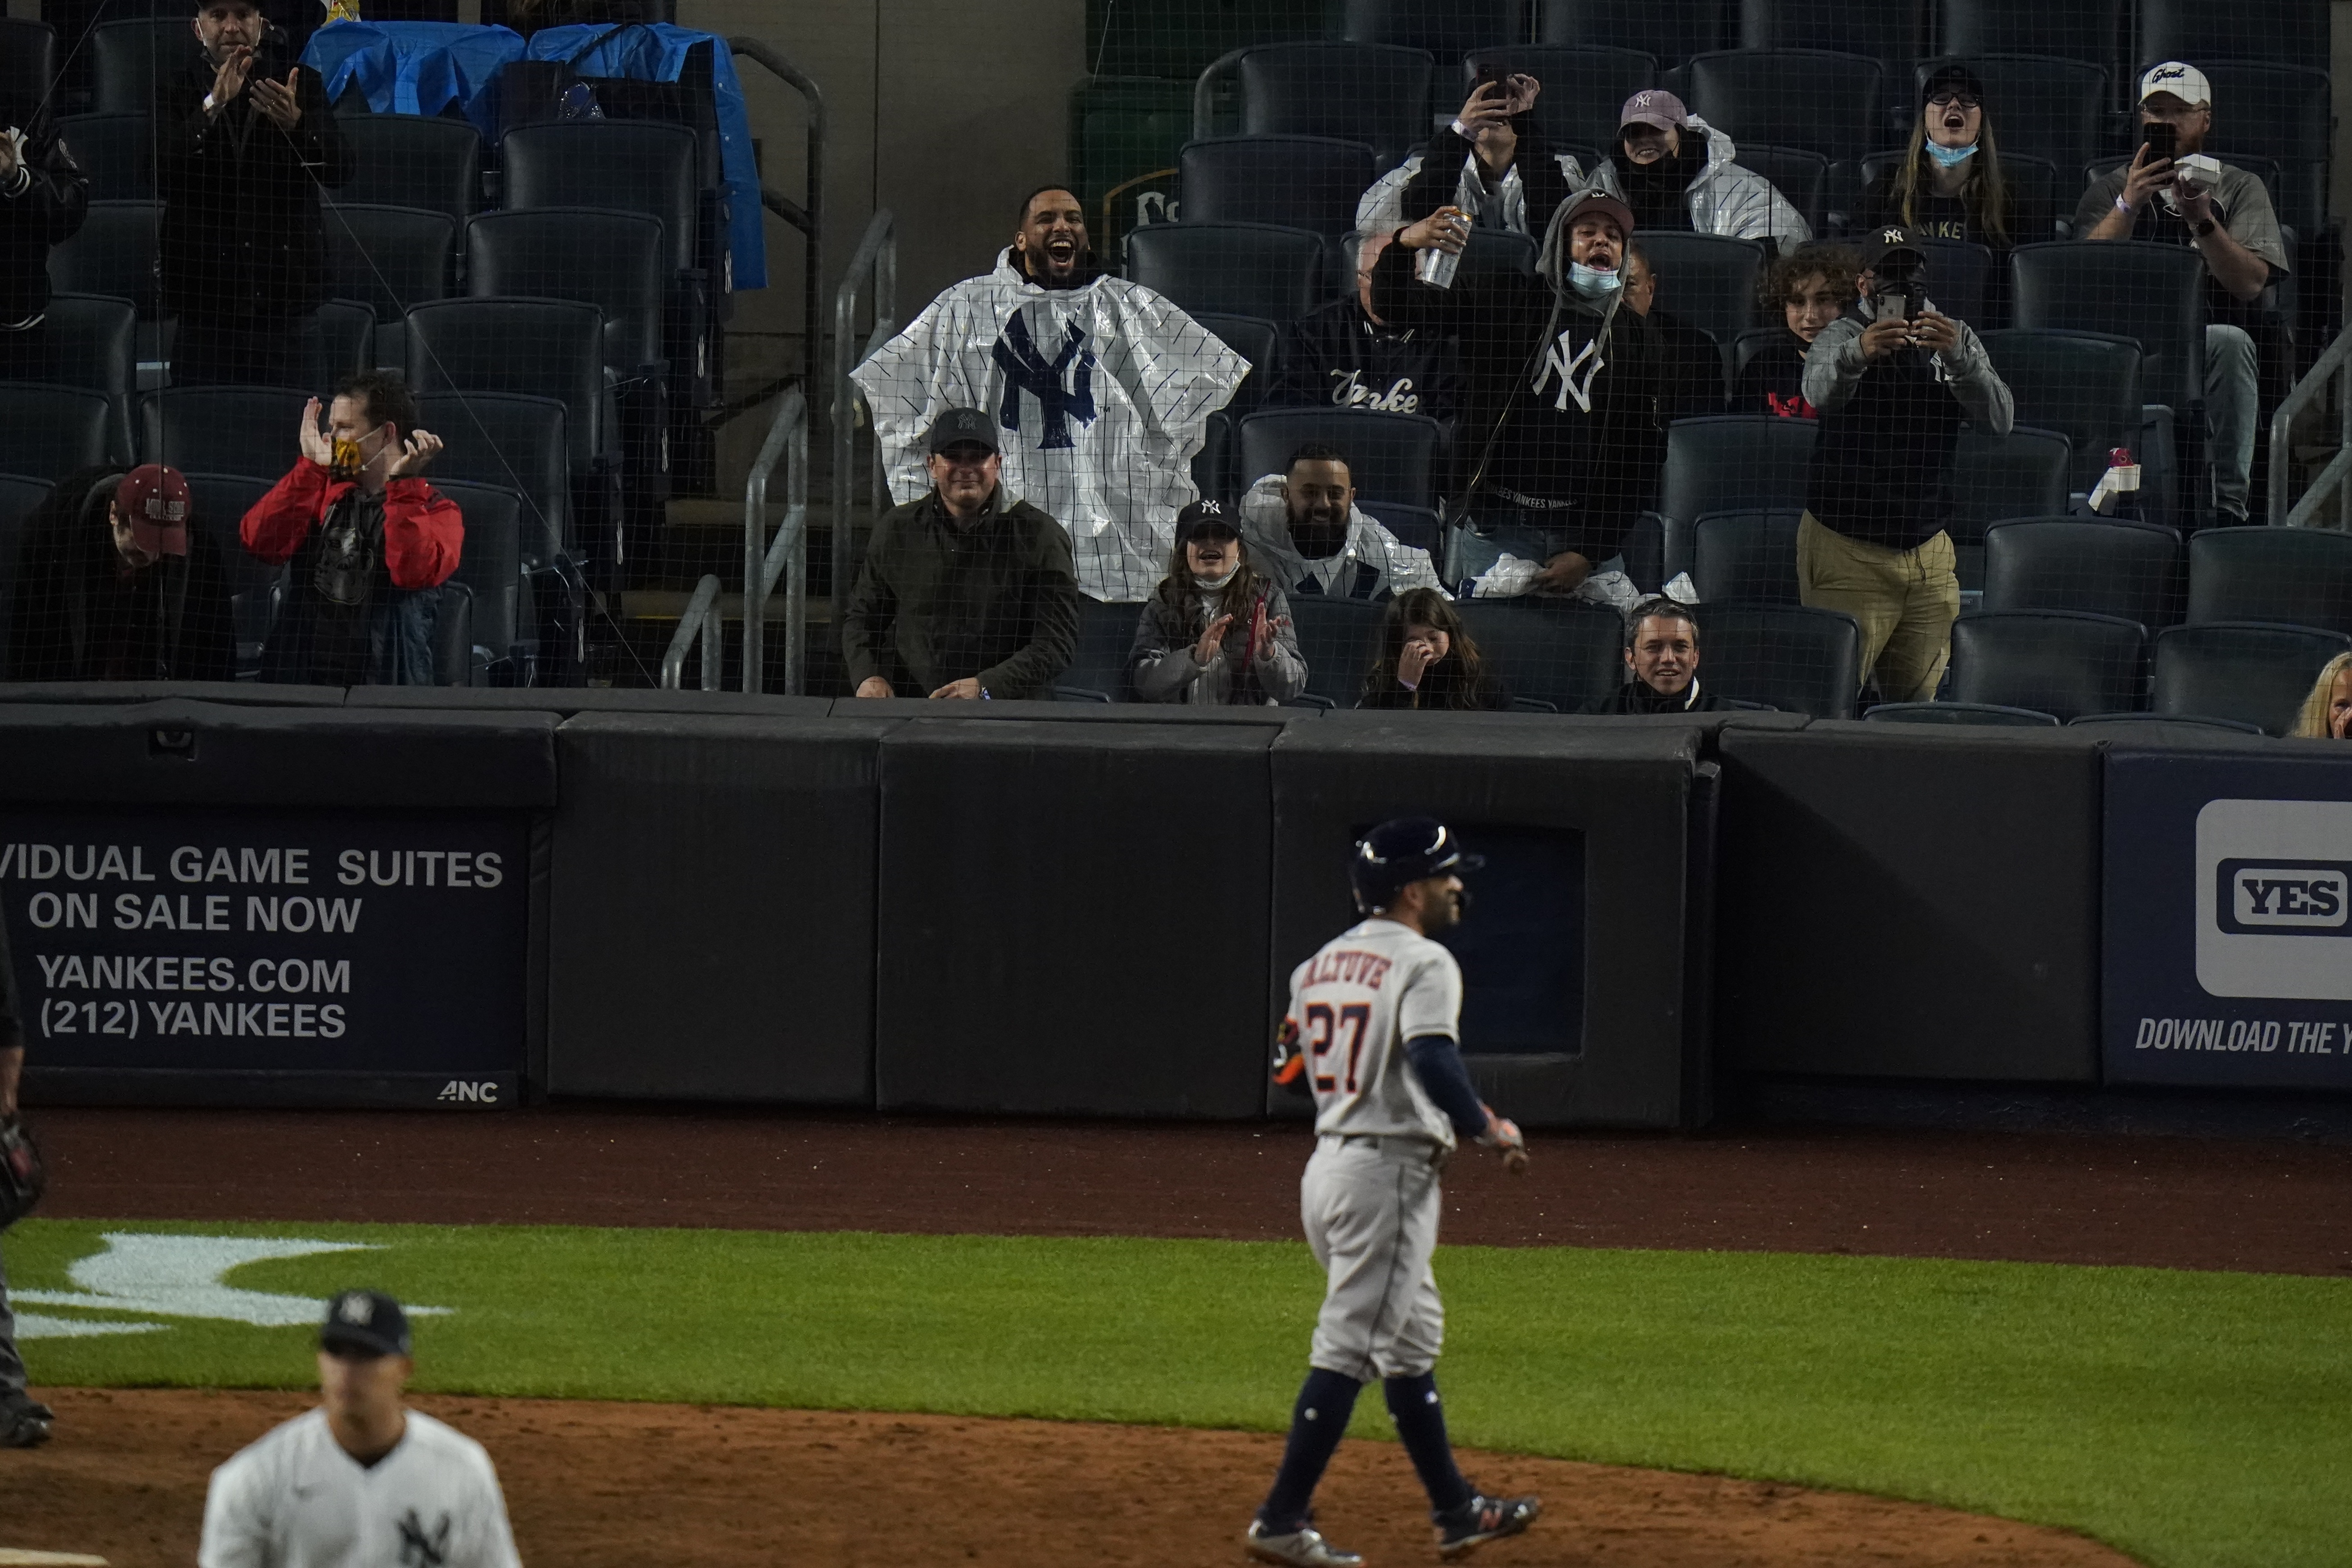 Astros complain to MLB about taunting, Yankees security bans Oscar the  Grouch costume, report says 